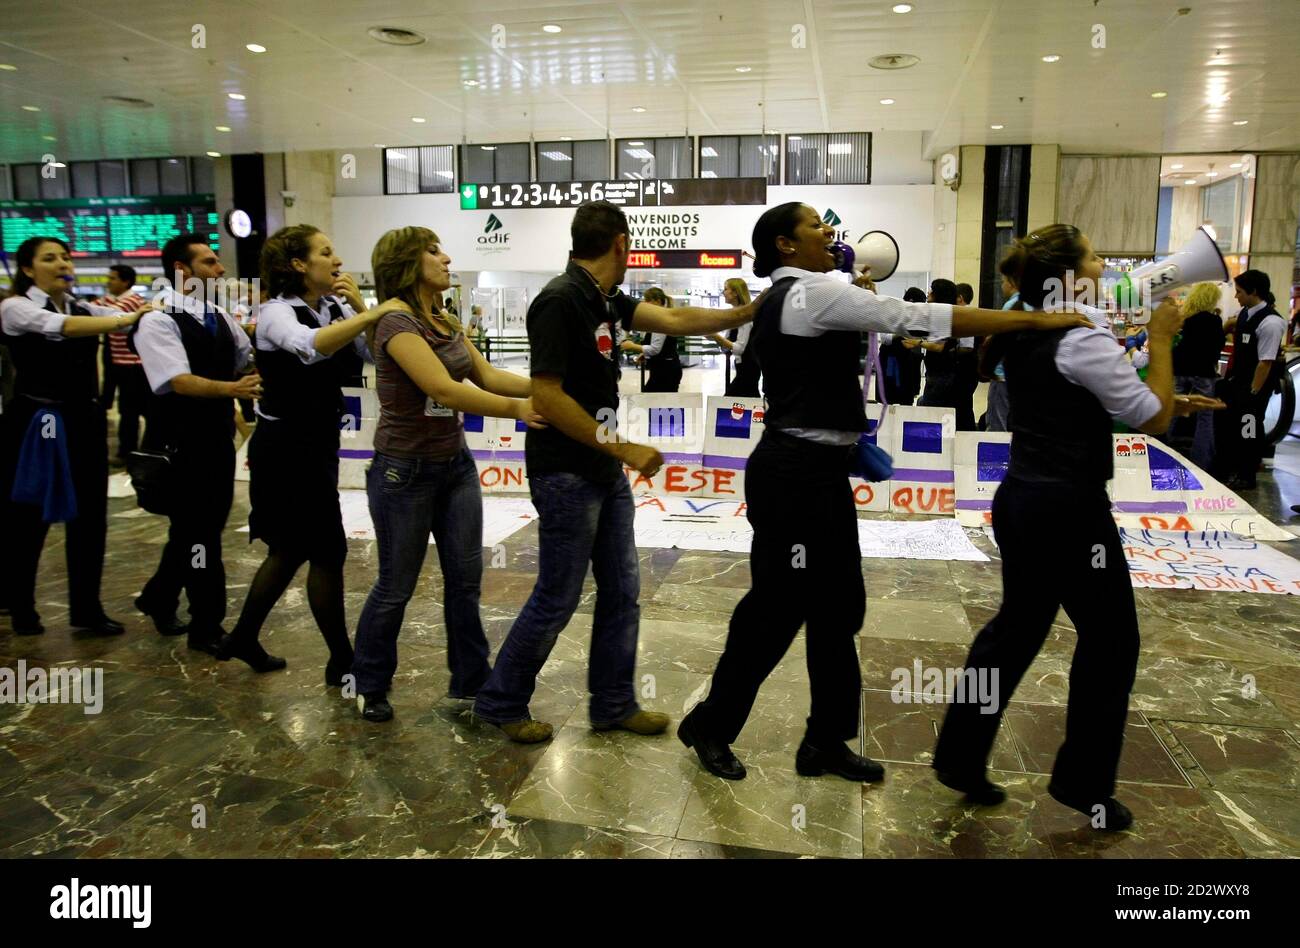 Workers of Wagon-Lits in the high-speed railway AVE of the Madrid-Barcelona-Madrid itinerary continue to strike in Barcelona Sants railway station June 13, 2008, demanding salary and labour improvements.  REUTERS/Gustau Nacarino  (SPAIN) Stock Photo